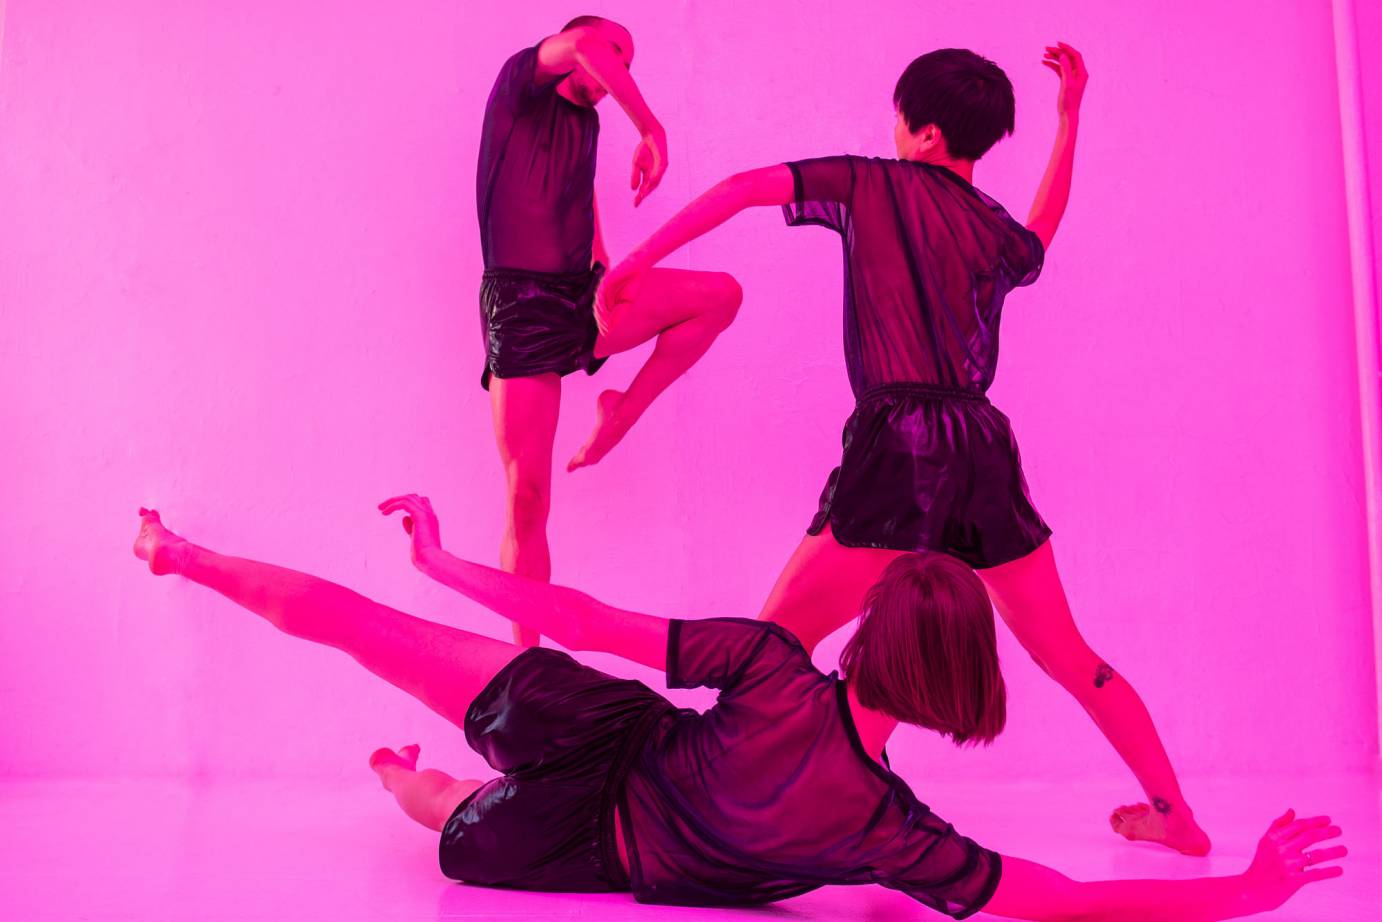 A trio strikes poses against a hot pink background